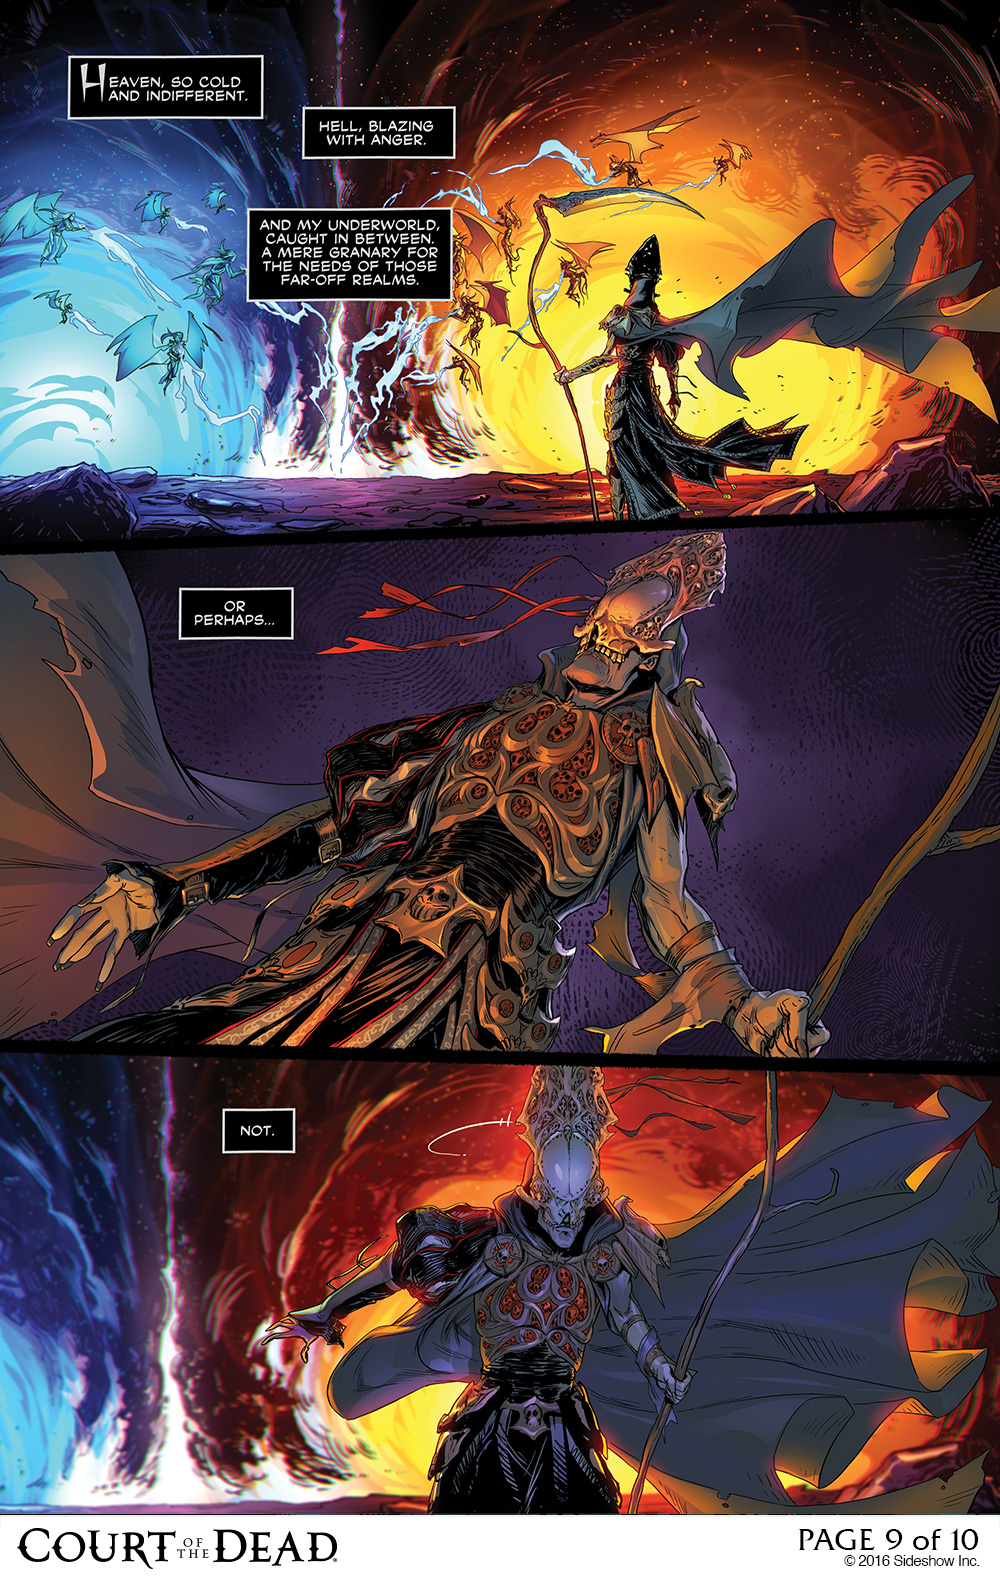 Death’s Plans Revealed In Our Final Court Of The Dead Comic Preview